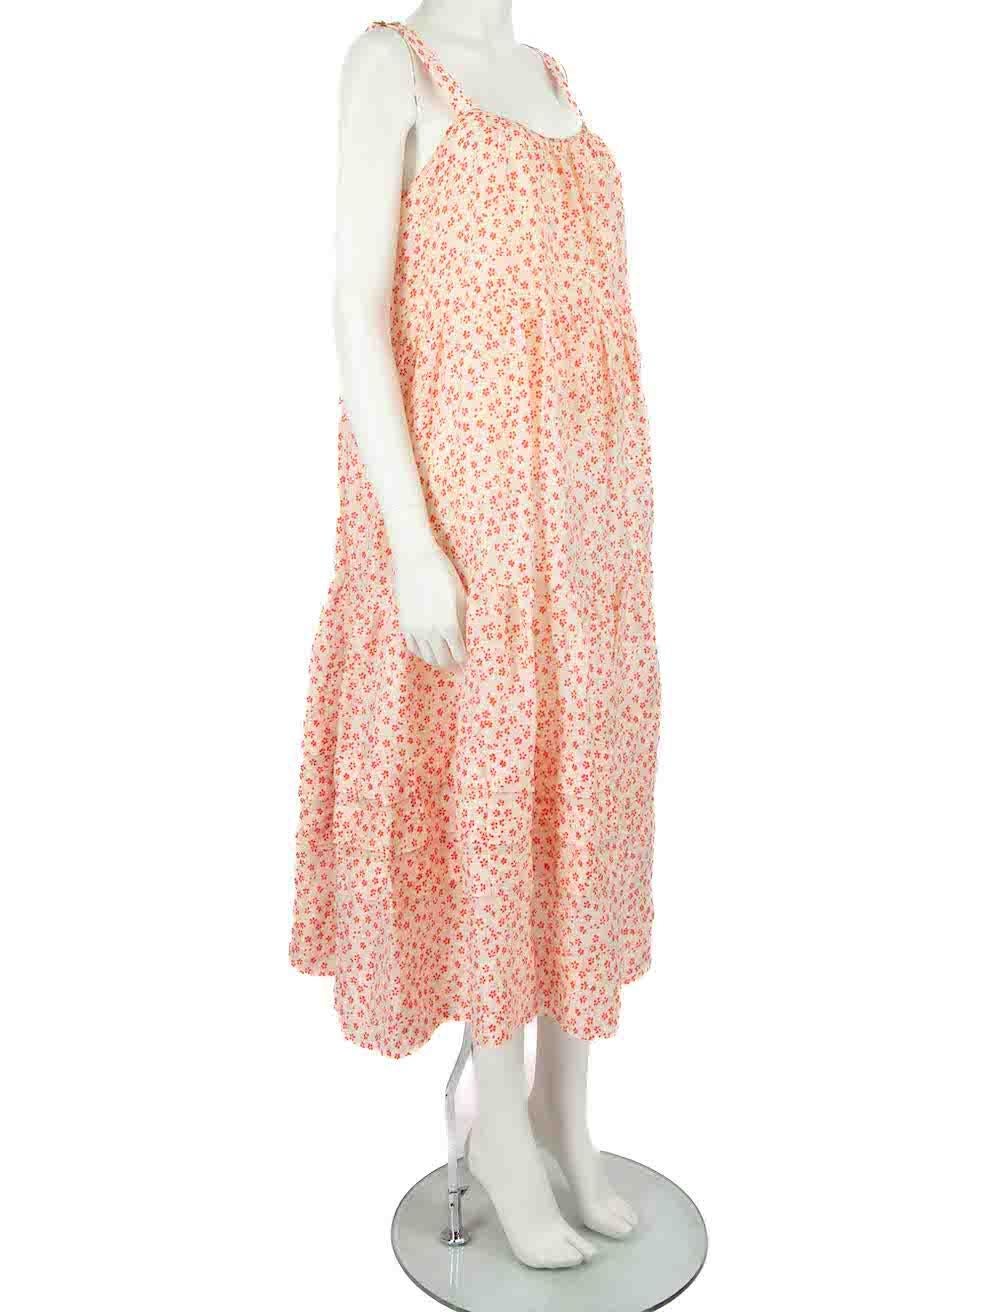 CONDITION is Never worn, with tags. No visible wear to dress is evident on this new Lee Mathews designer resale item.
 
 
 
 Details
 
 
 Pink
 
 Linen
 
 Dress
 
 Floral print
 
 Sleeveless
 
 Adjustable shoulder straps
 
 Round neck
 
 Midi
 
 
 
